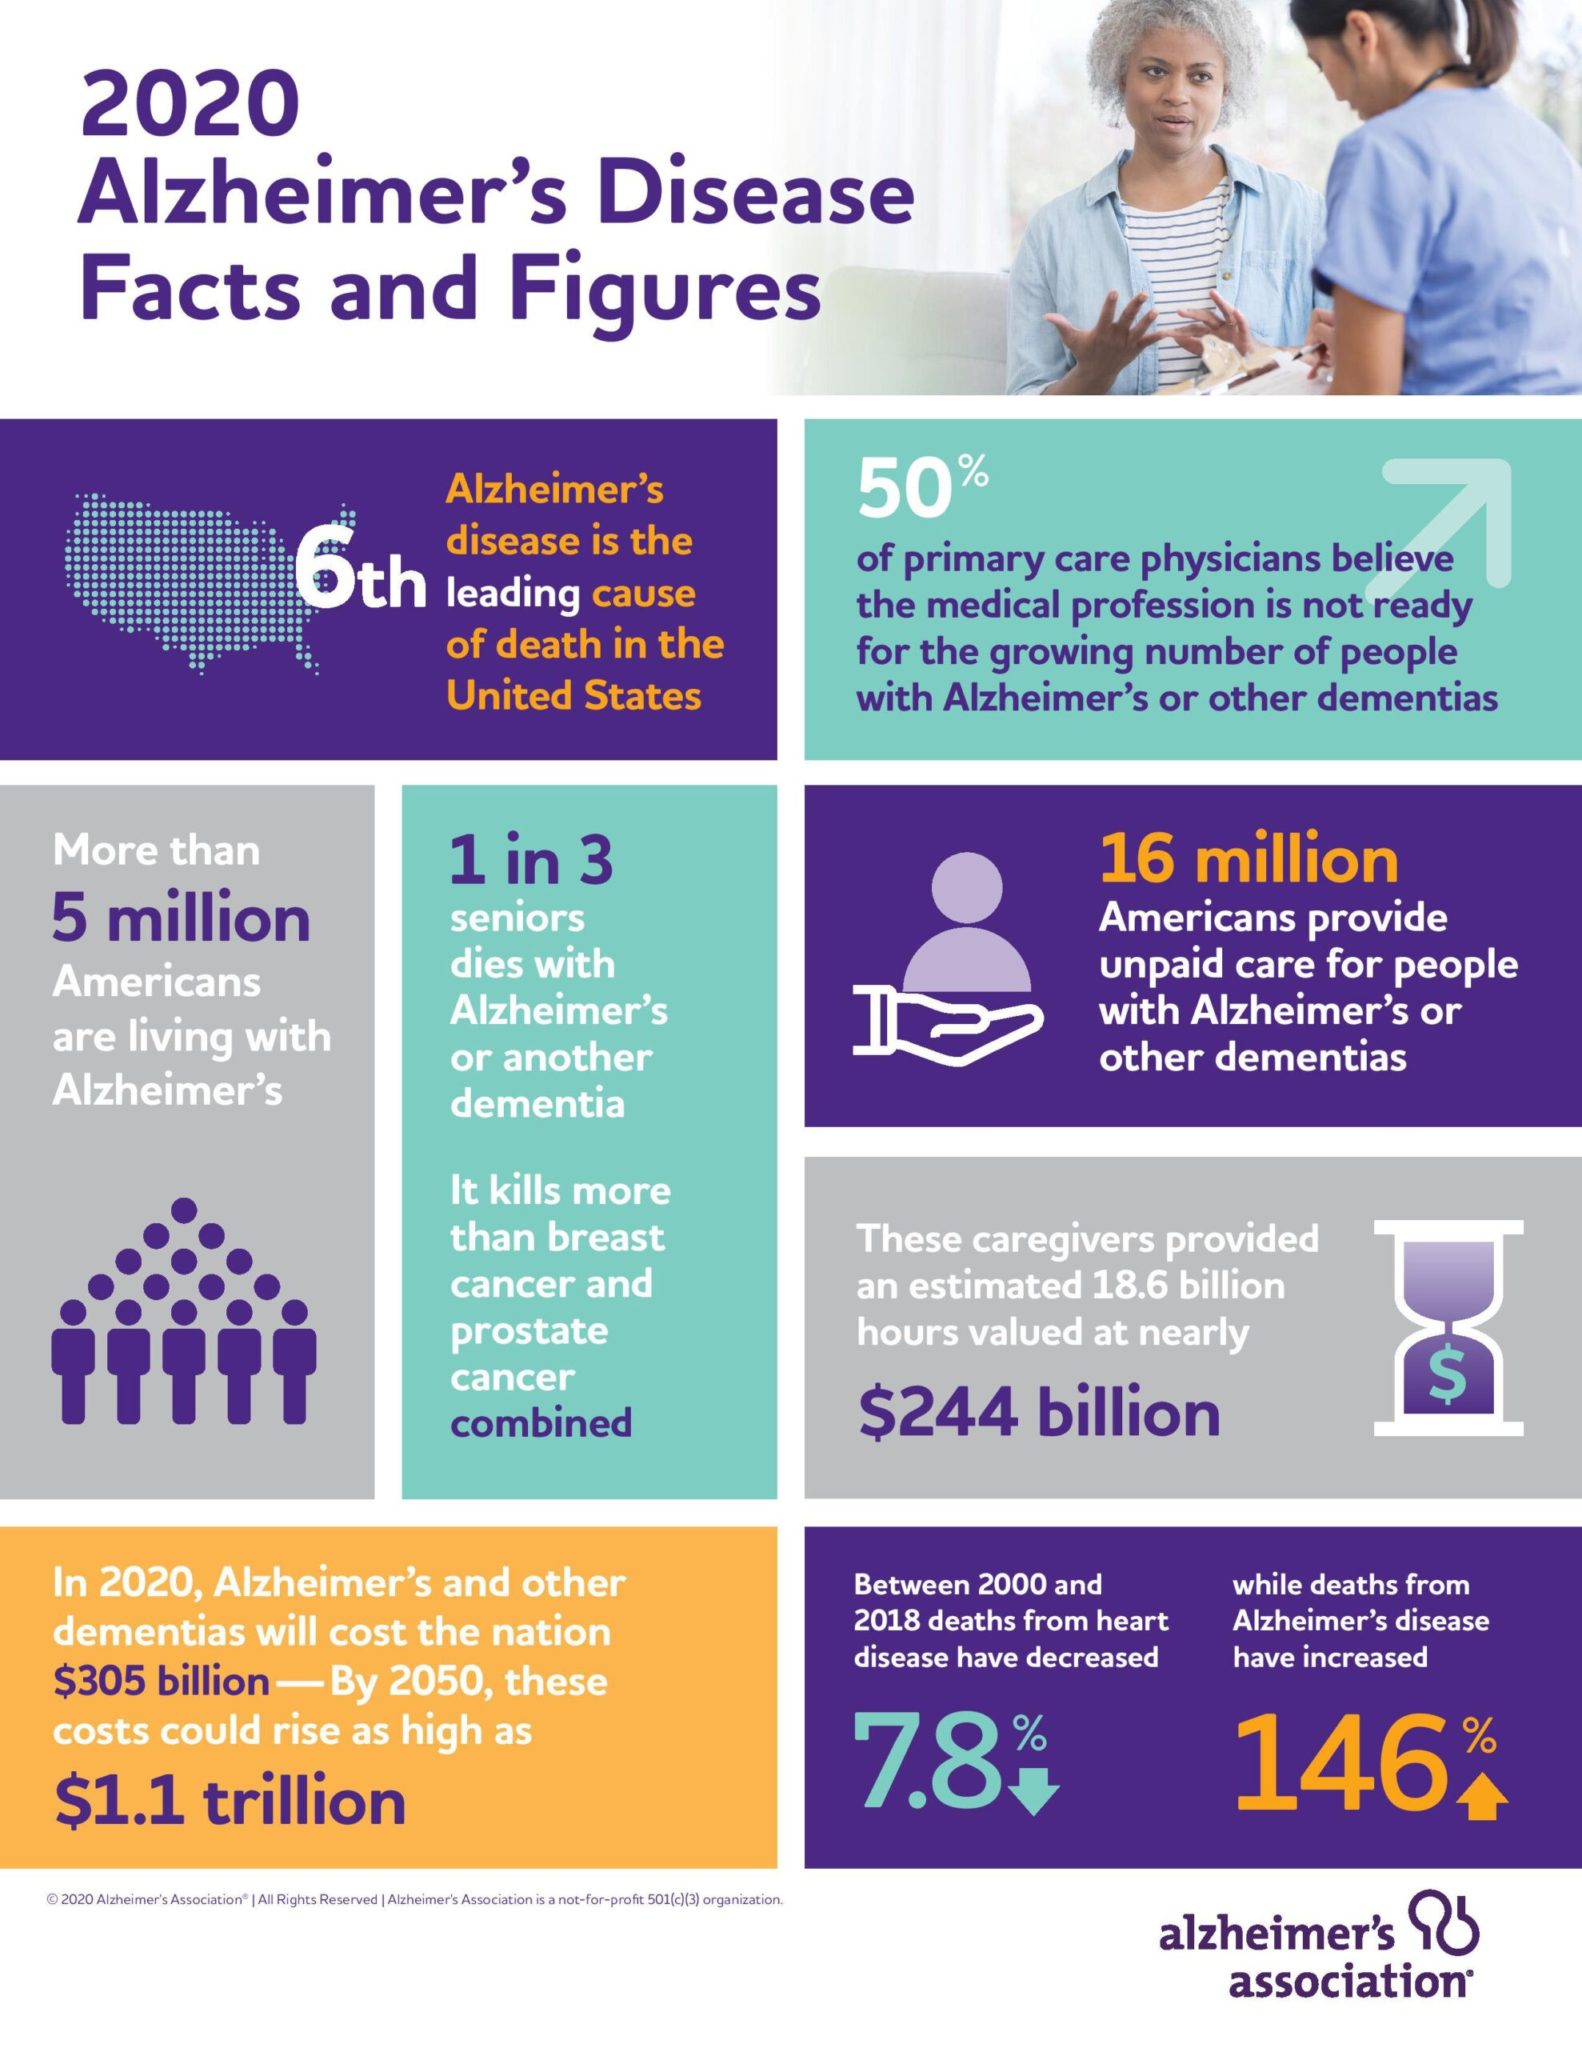 Alzheimer's Disease Facts & Figures Infographic